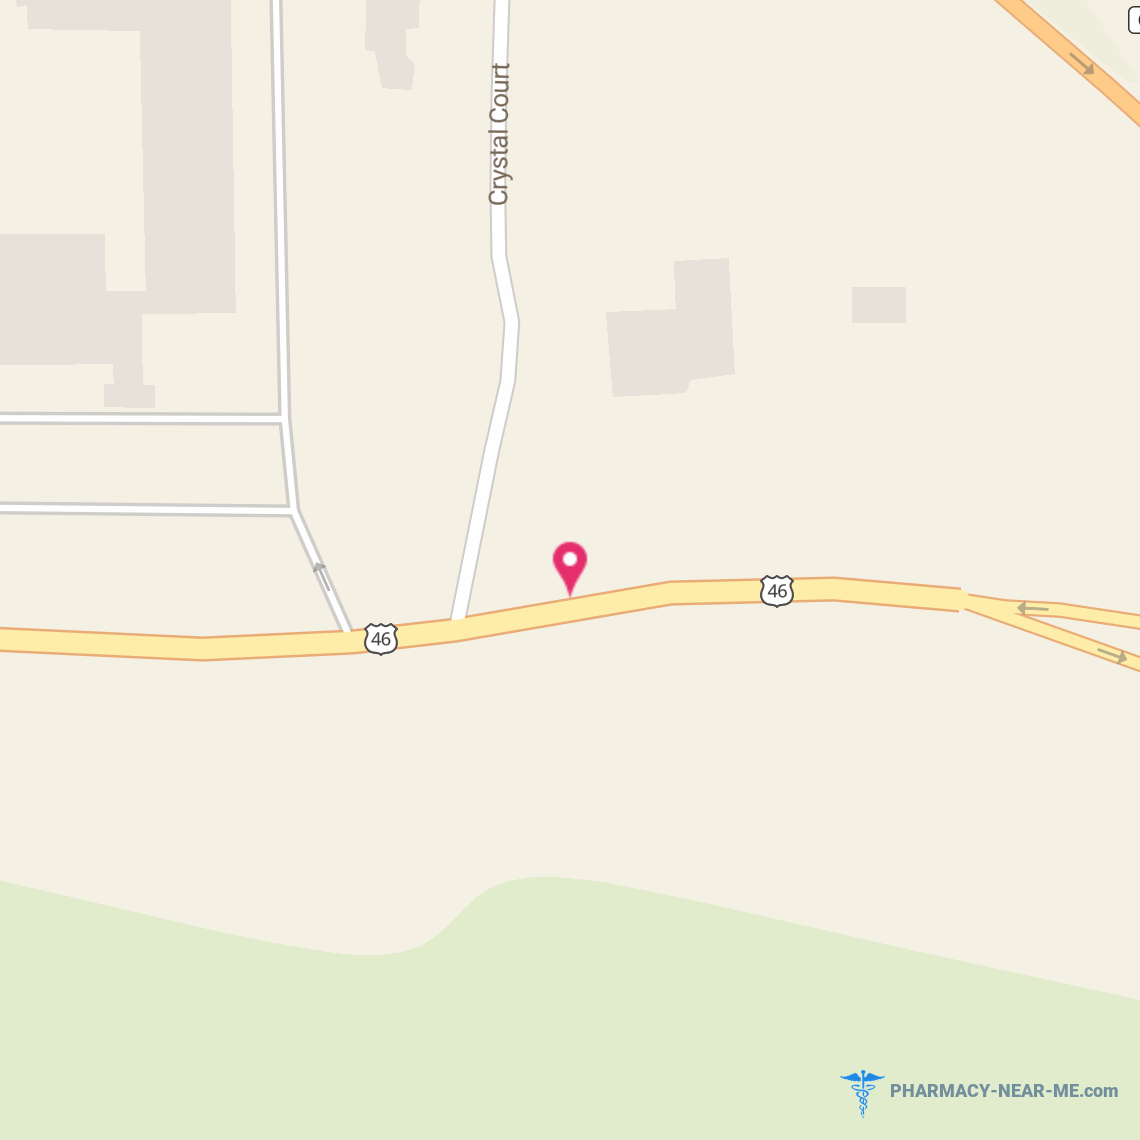 IMPRIMISRX - Pharmacy Hours, Phone, Reviews & Information: 1705 US Route 46, Ledgewood, New Jersey 07852, United States